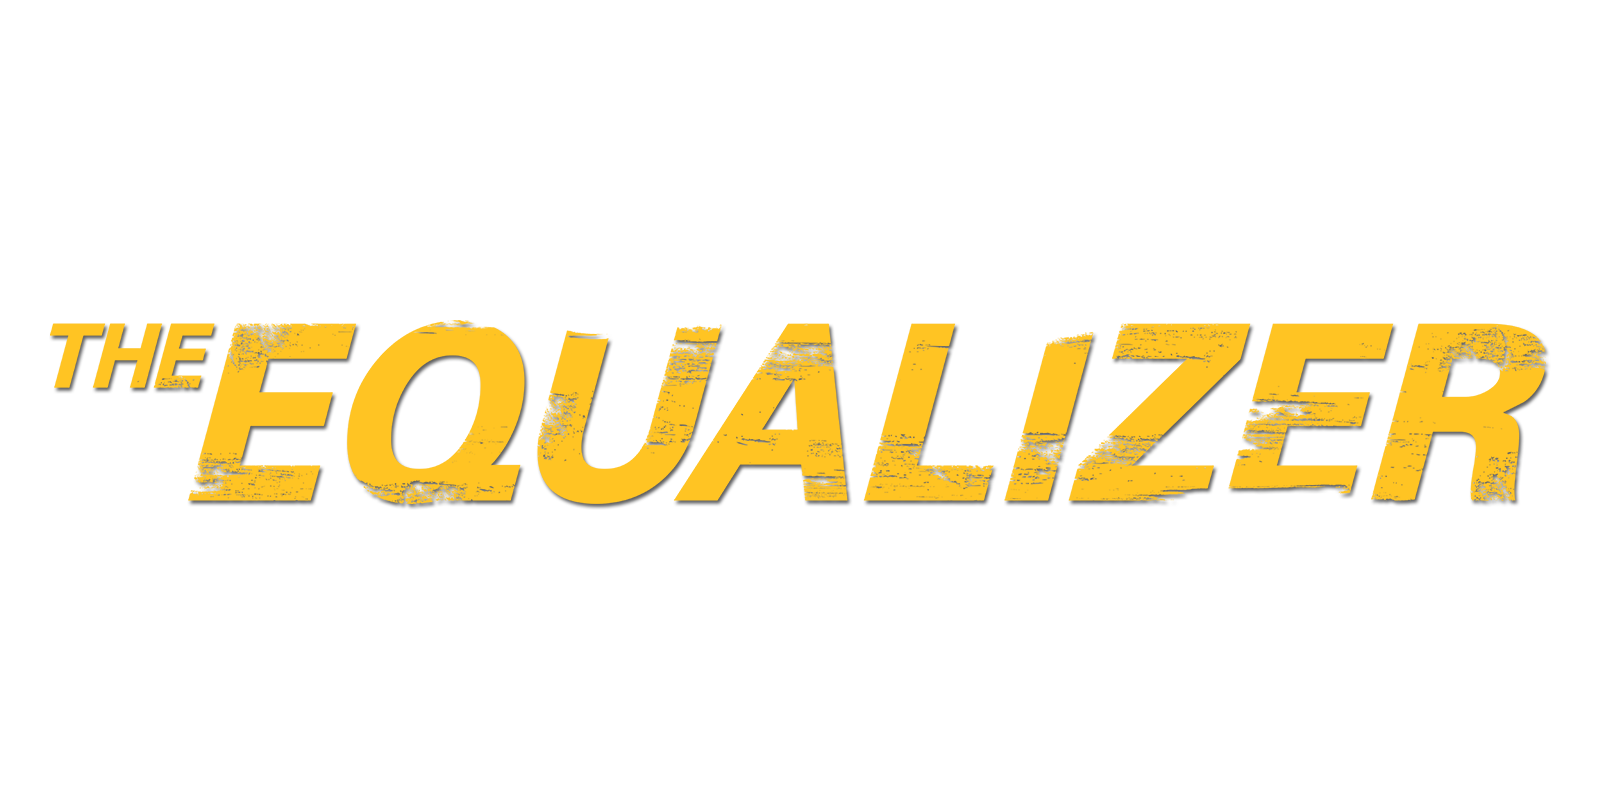 the equalizer full movie online